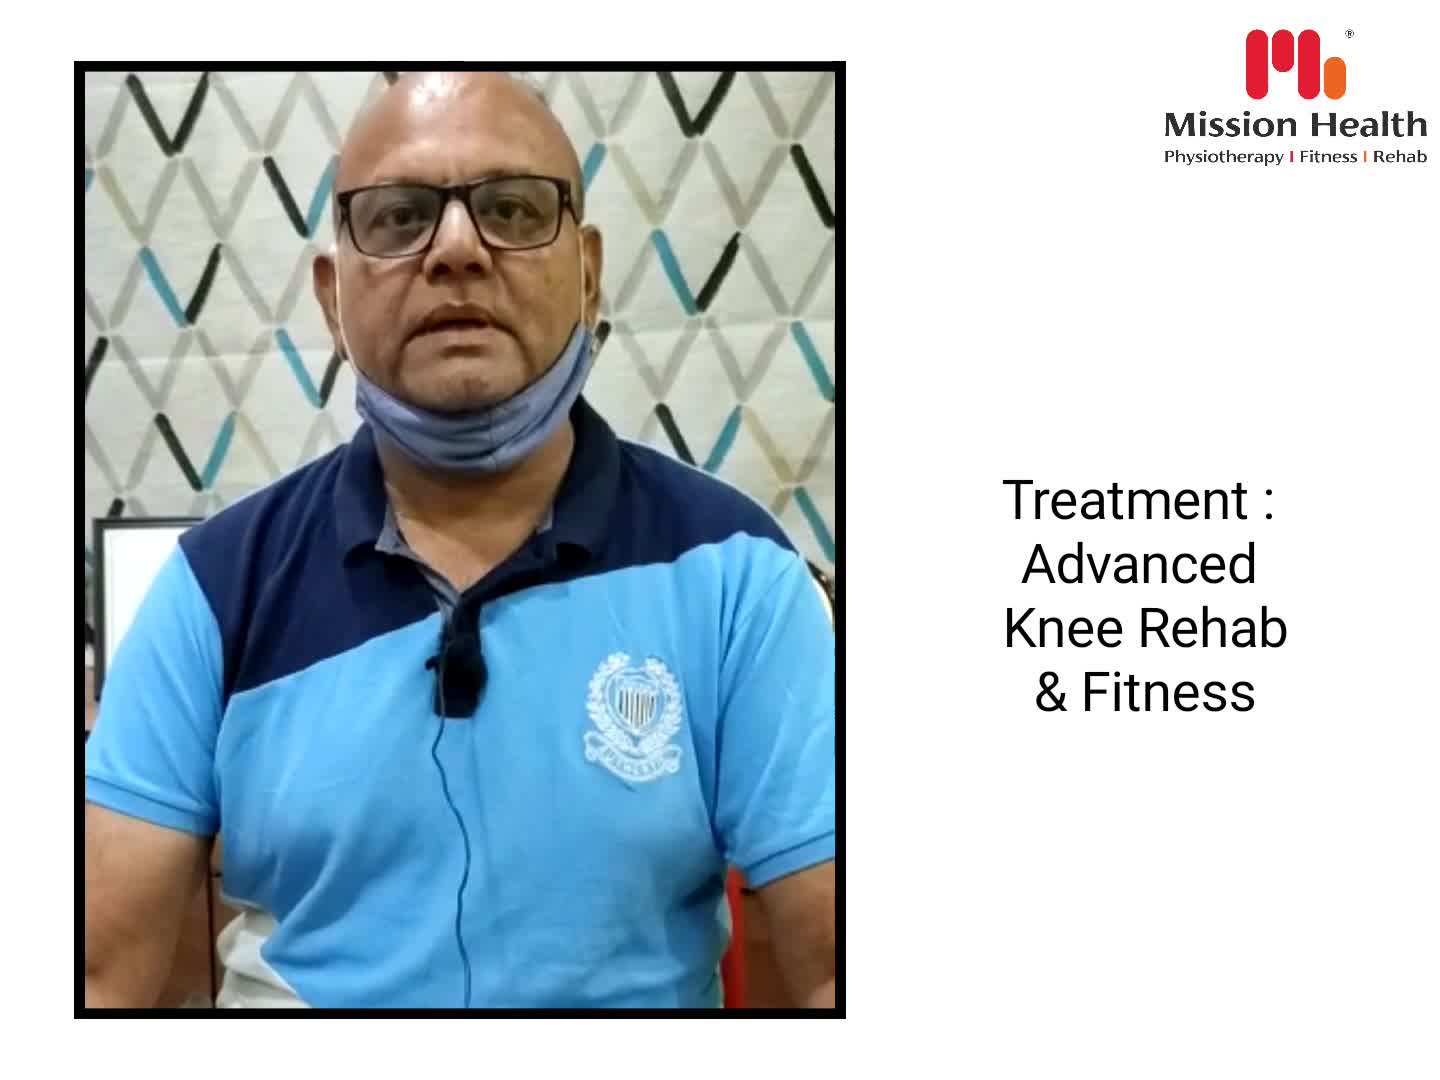 Mr. Rajesh Nirmal was suffering from severe knee pain which made it difficult for him to stand and walk for a longer duration. 

After his treatment at Mission Health, He is now leading a pain-free life and focused on his overall well being.

Mr. Nirmal has also underwent a fitness training program with the guidance of a Sports Physiotherapist after which he was able to lose 6-7 kgs.

Here, he shares his experience with Mission Health in his own words...

Call : +91 63562 63562
Visit : www.missionhealth.co.in

#bestphysiotherapyclinicinahmedabad 
#bestmedicalgym 
#bestfitnessclinic 
#bestreviewsongoogle 
#feedbacksofmissionhealth 
#missionhealthfamily 
#missionhealthfeedback 
#missionhealthtestimonial 
#missionhealthindia 
#indiasbestphysiotherapycentre 
#kneepainrelief 
#missionhealthkneeclinic
#viralpost 
#viralvideos 
#instagood 
#explorepage✨ 
#insragram 
#instafamily❤️ 
#kneerehab 
#physiotherapy 
#reelkarofeelkaro 
#reelsvideo 
#trending 
#awareness